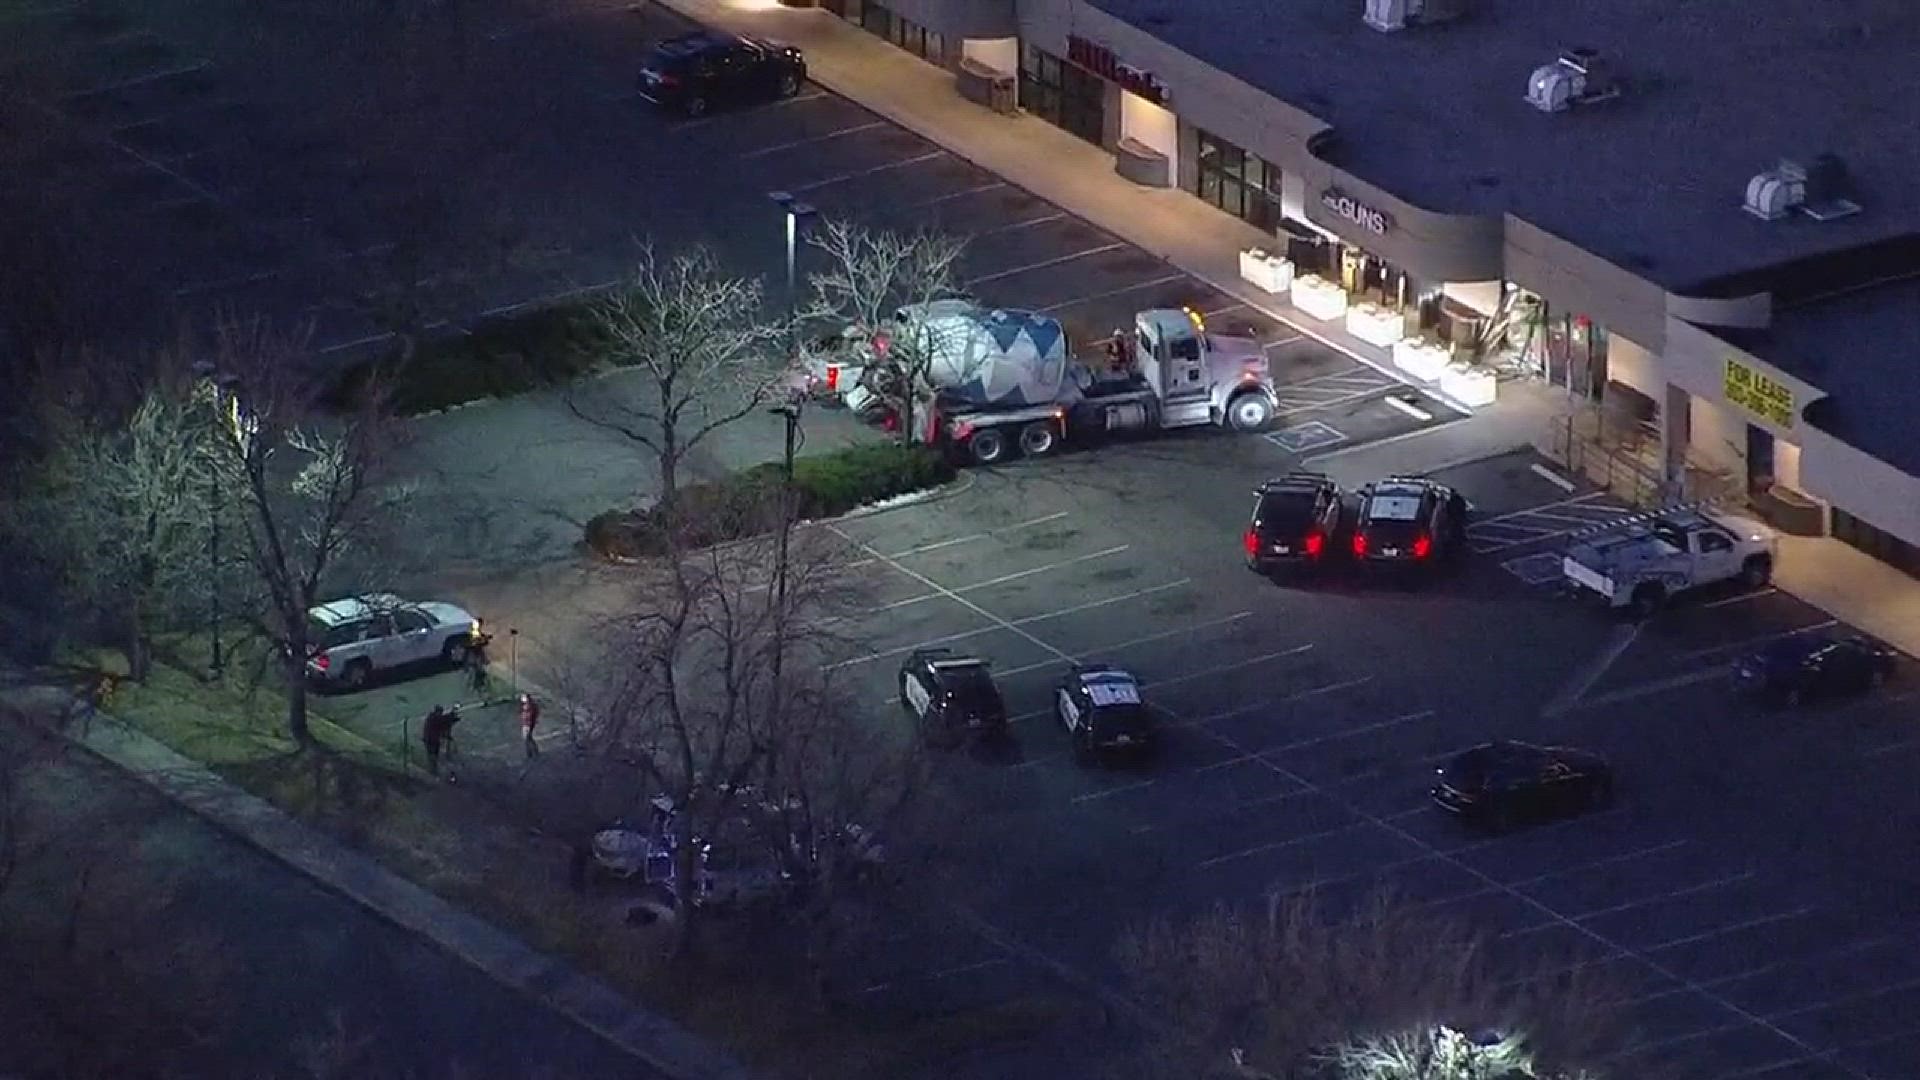 Sky 9 was over the scene of a gun store in Lakewood where thieves used a cement truck to tear off the front doors.